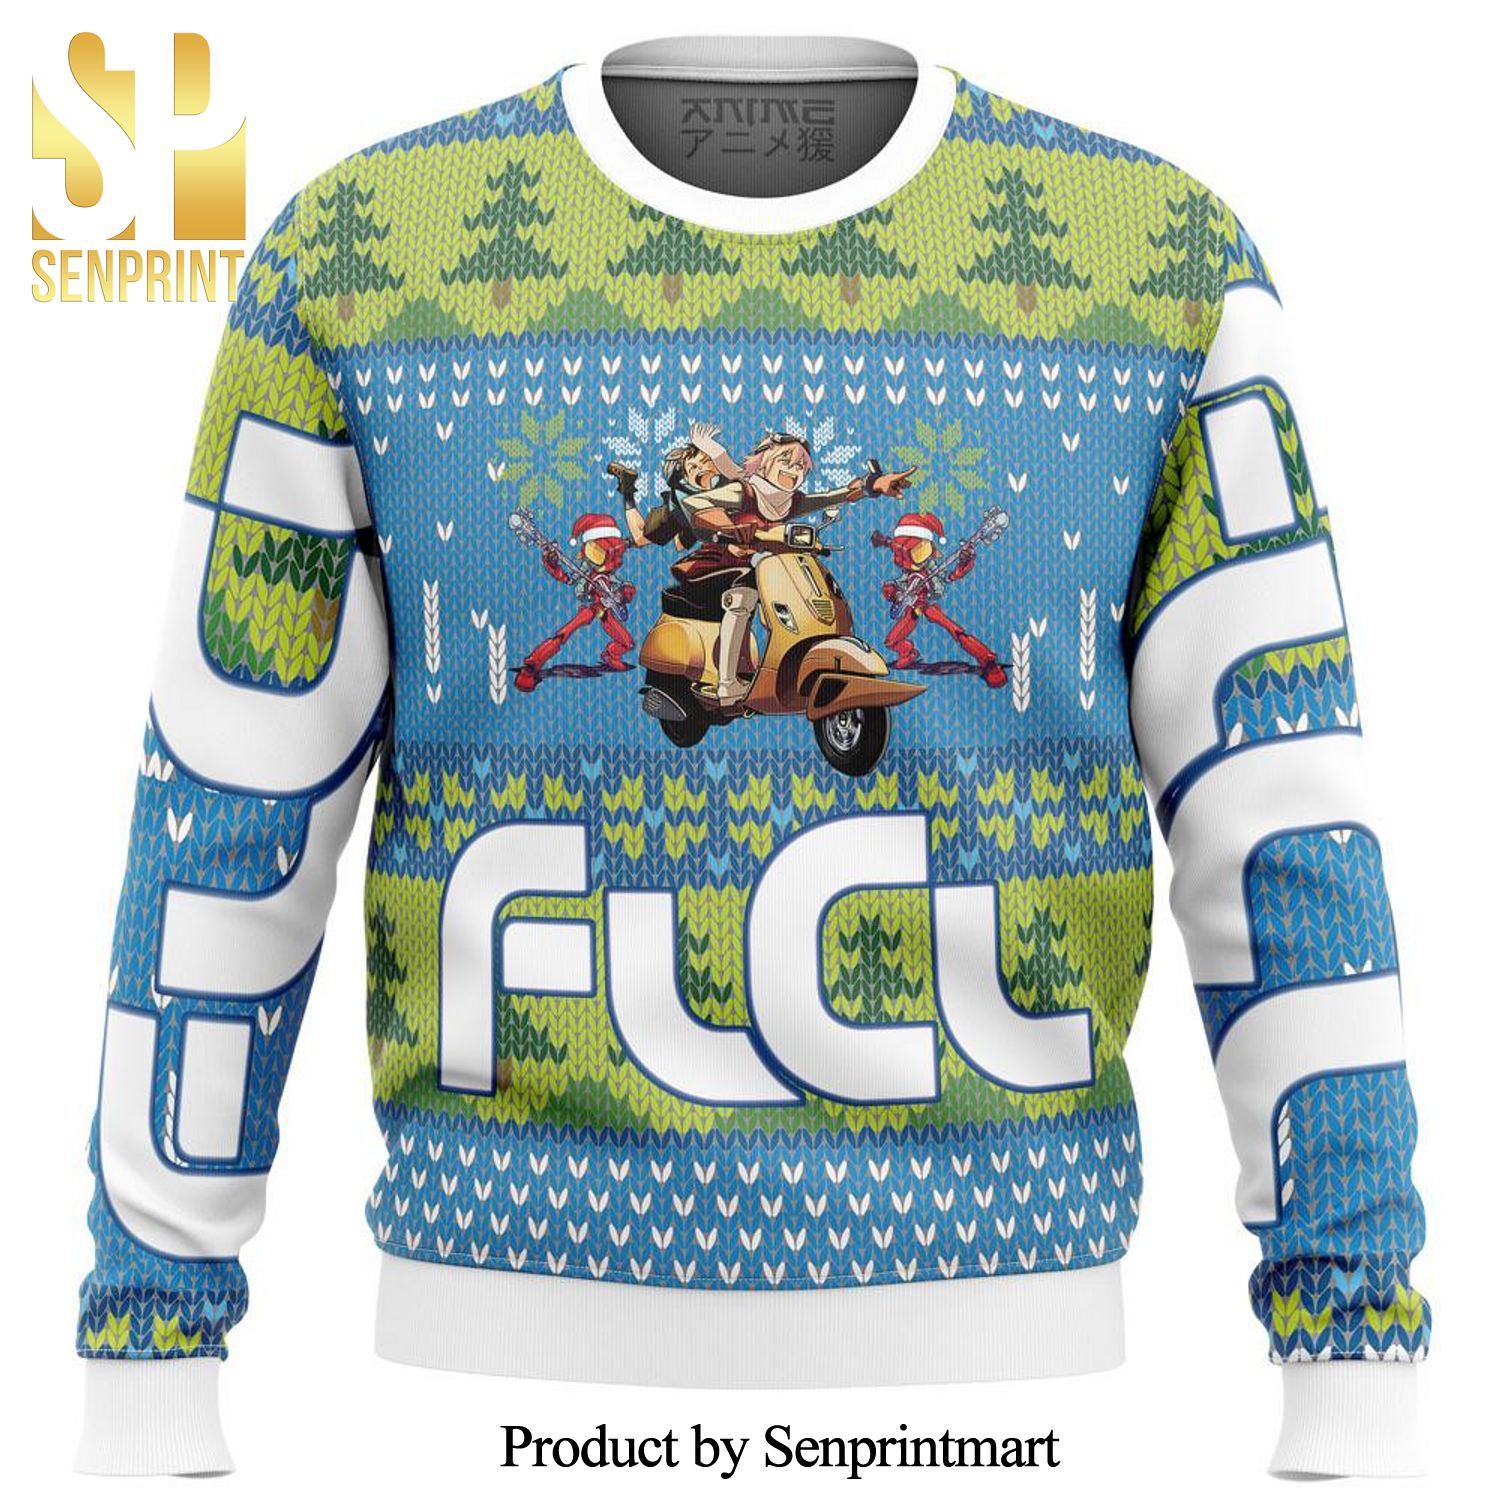 FLCL Fooly Cooly Alt Premium Manga Anime Knitted Ugly Christmas Sweater